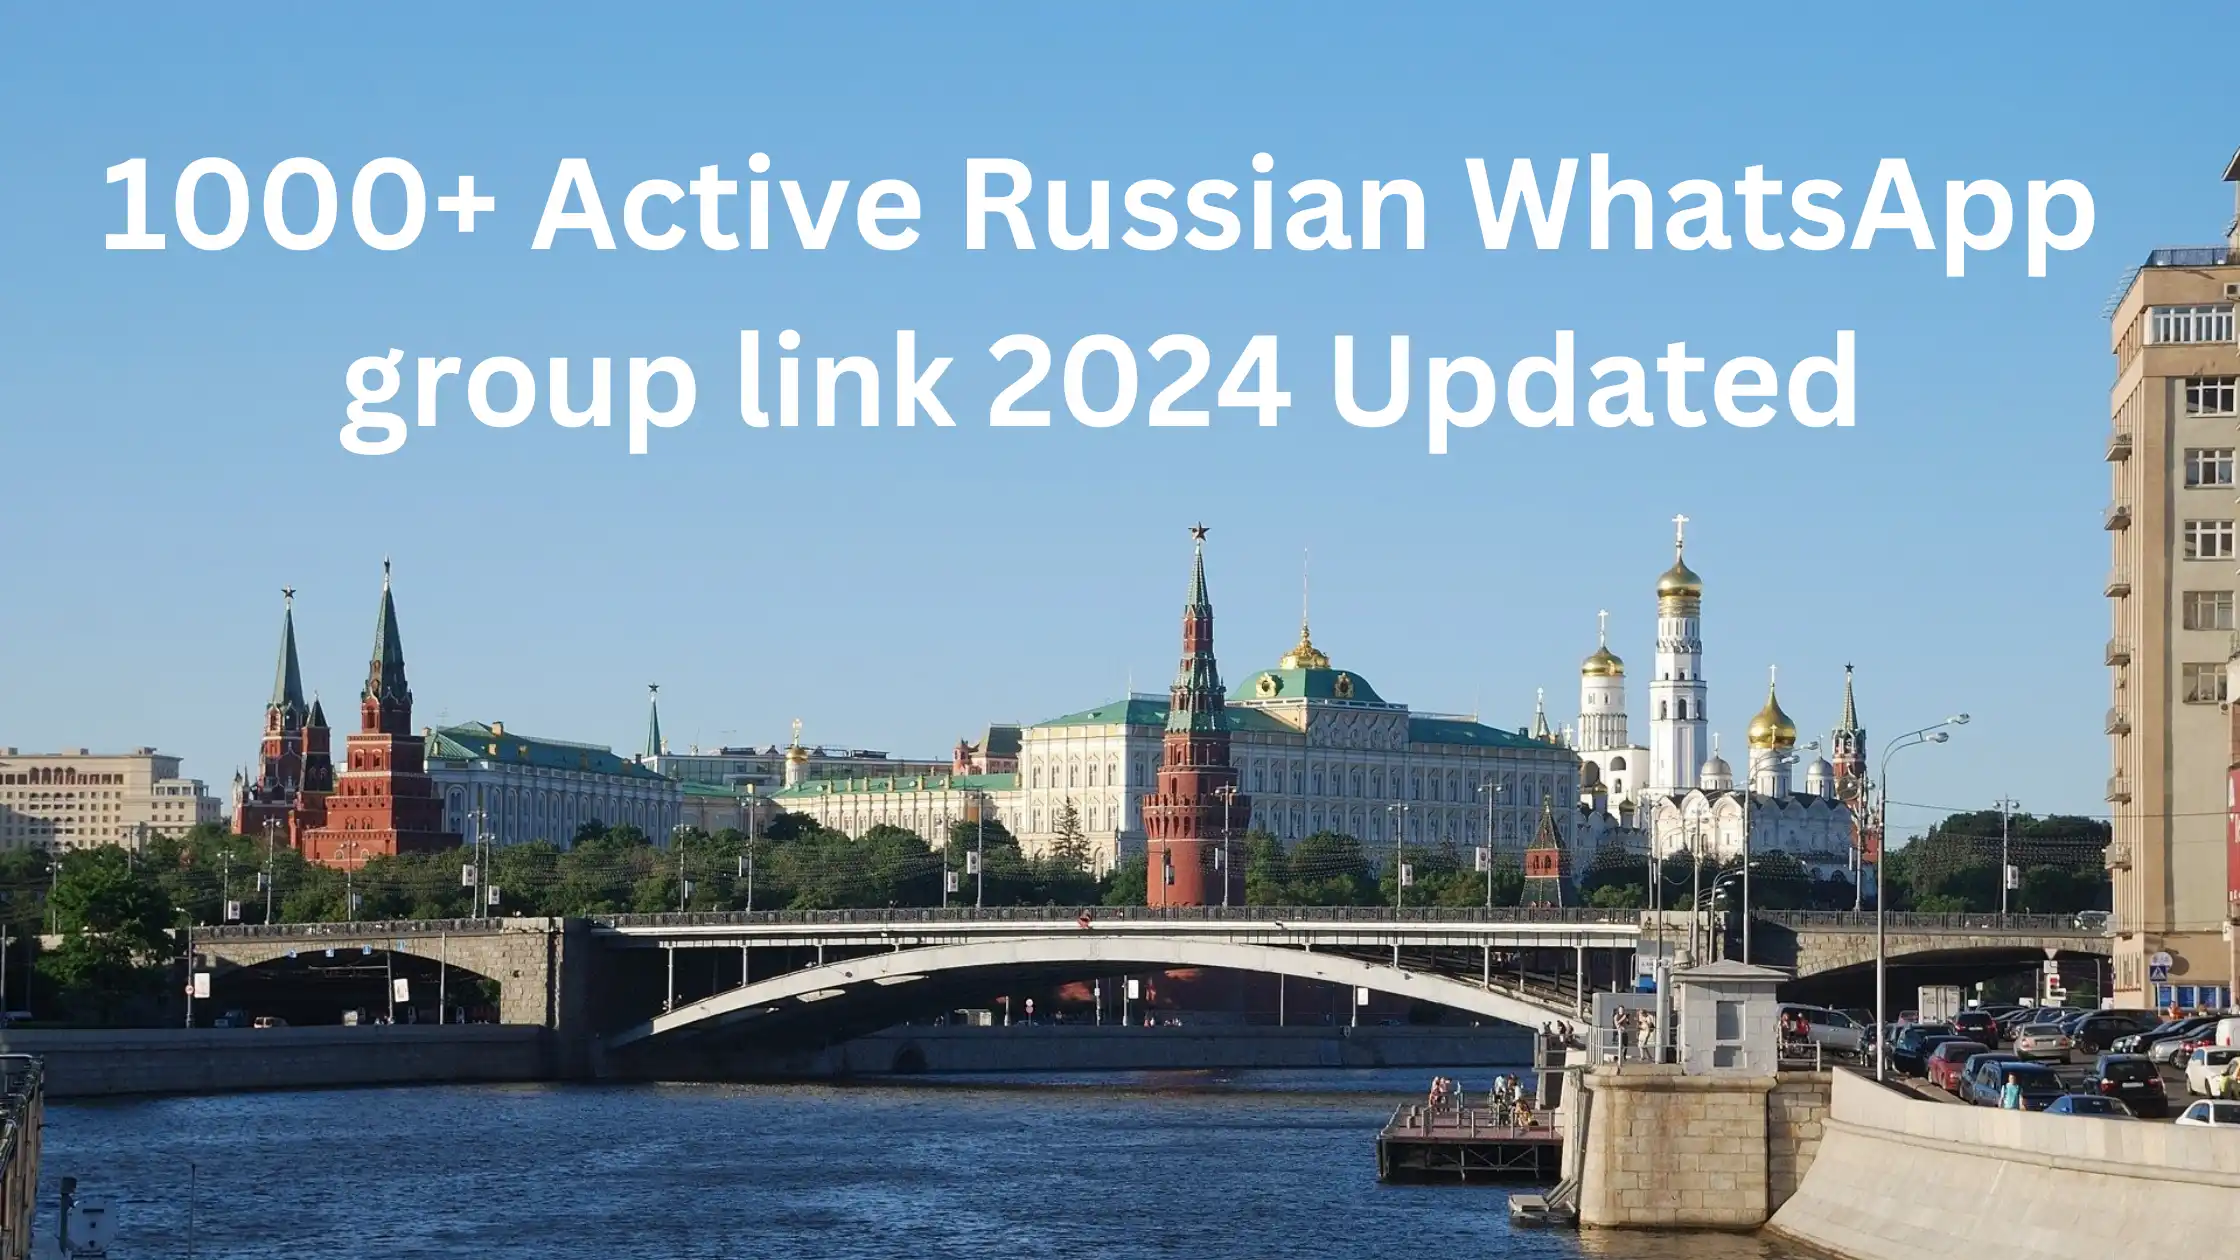 1000+ Active Russian WhatsApp group link 2024 Updated